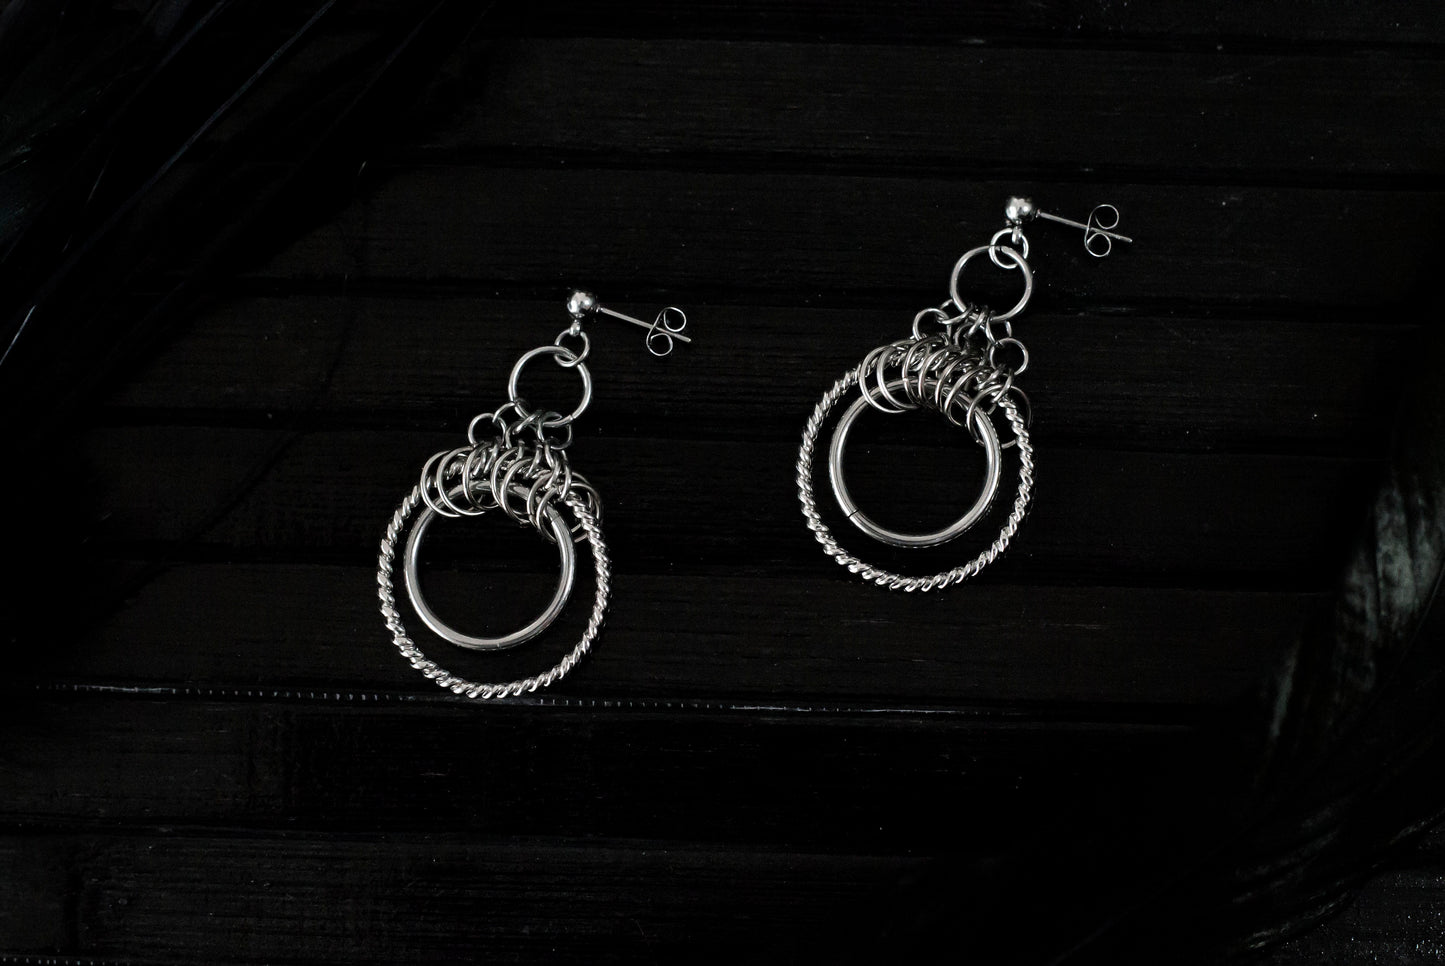 The image displays a pair of double hoop earrings with a sophisticated design. The earrings feature two concentric circles; the inner hoop is smooth and polished, while the outer hoop has a twisted rope-like texture, enhancing its visual appeal. Above the hoops, there is a cluster of smaller rings adding complexity to the design. These earrings, likely from Myril Jewels, reflect a gothic-chic style that merges elegance with an edgy touch, making them suitable for various occasions